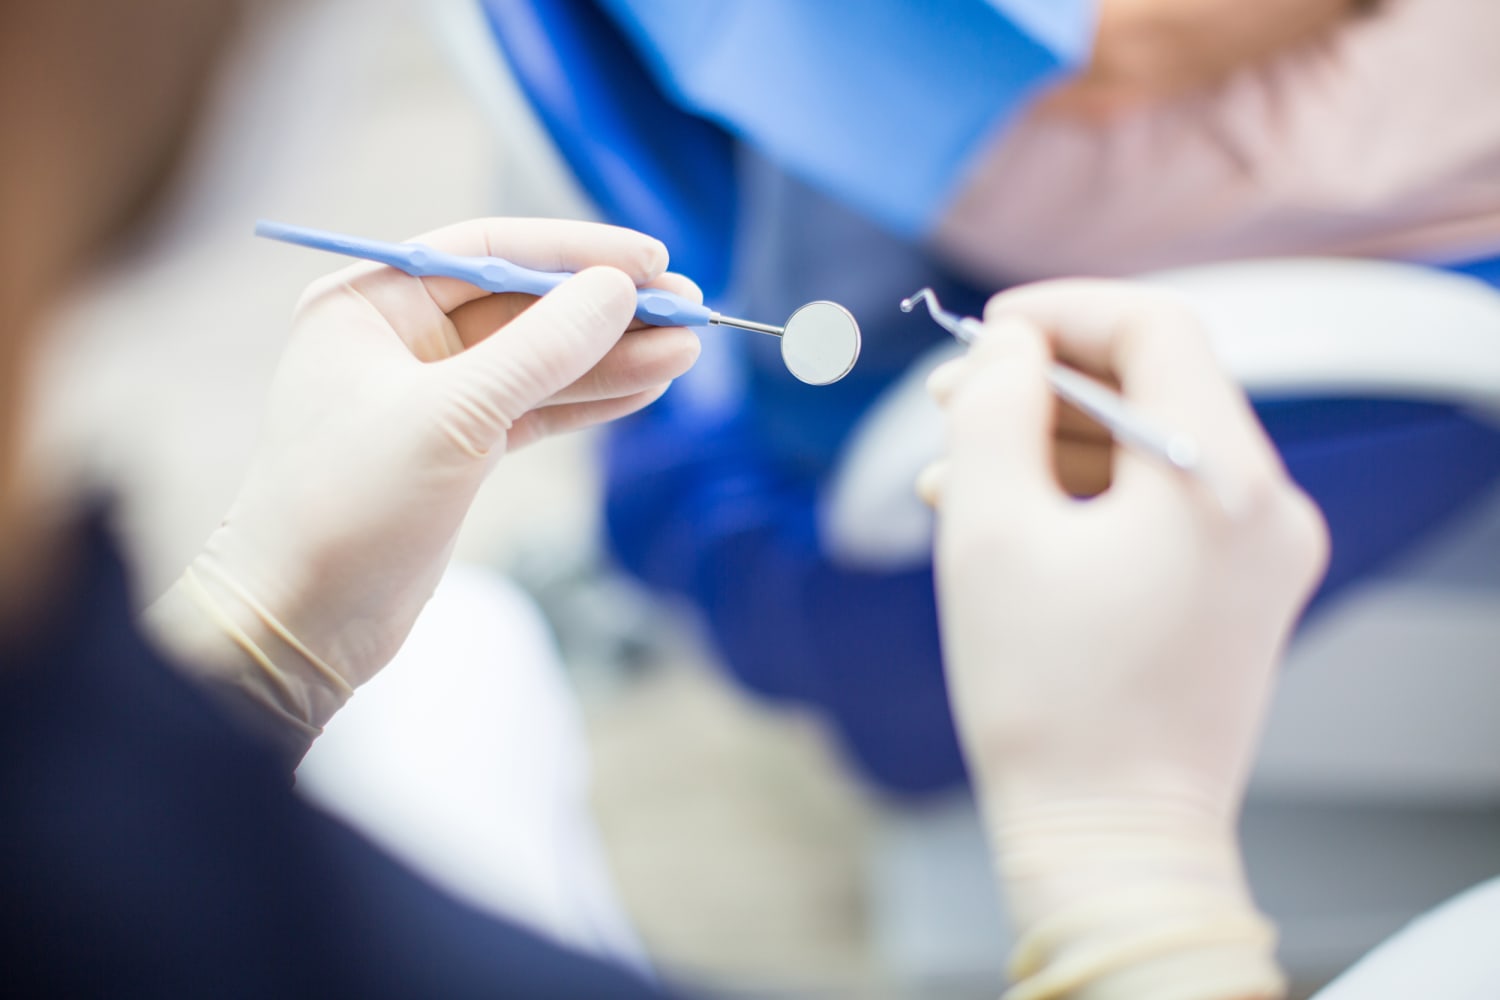 Dentists extract new fee from patients to keep up with rising ...